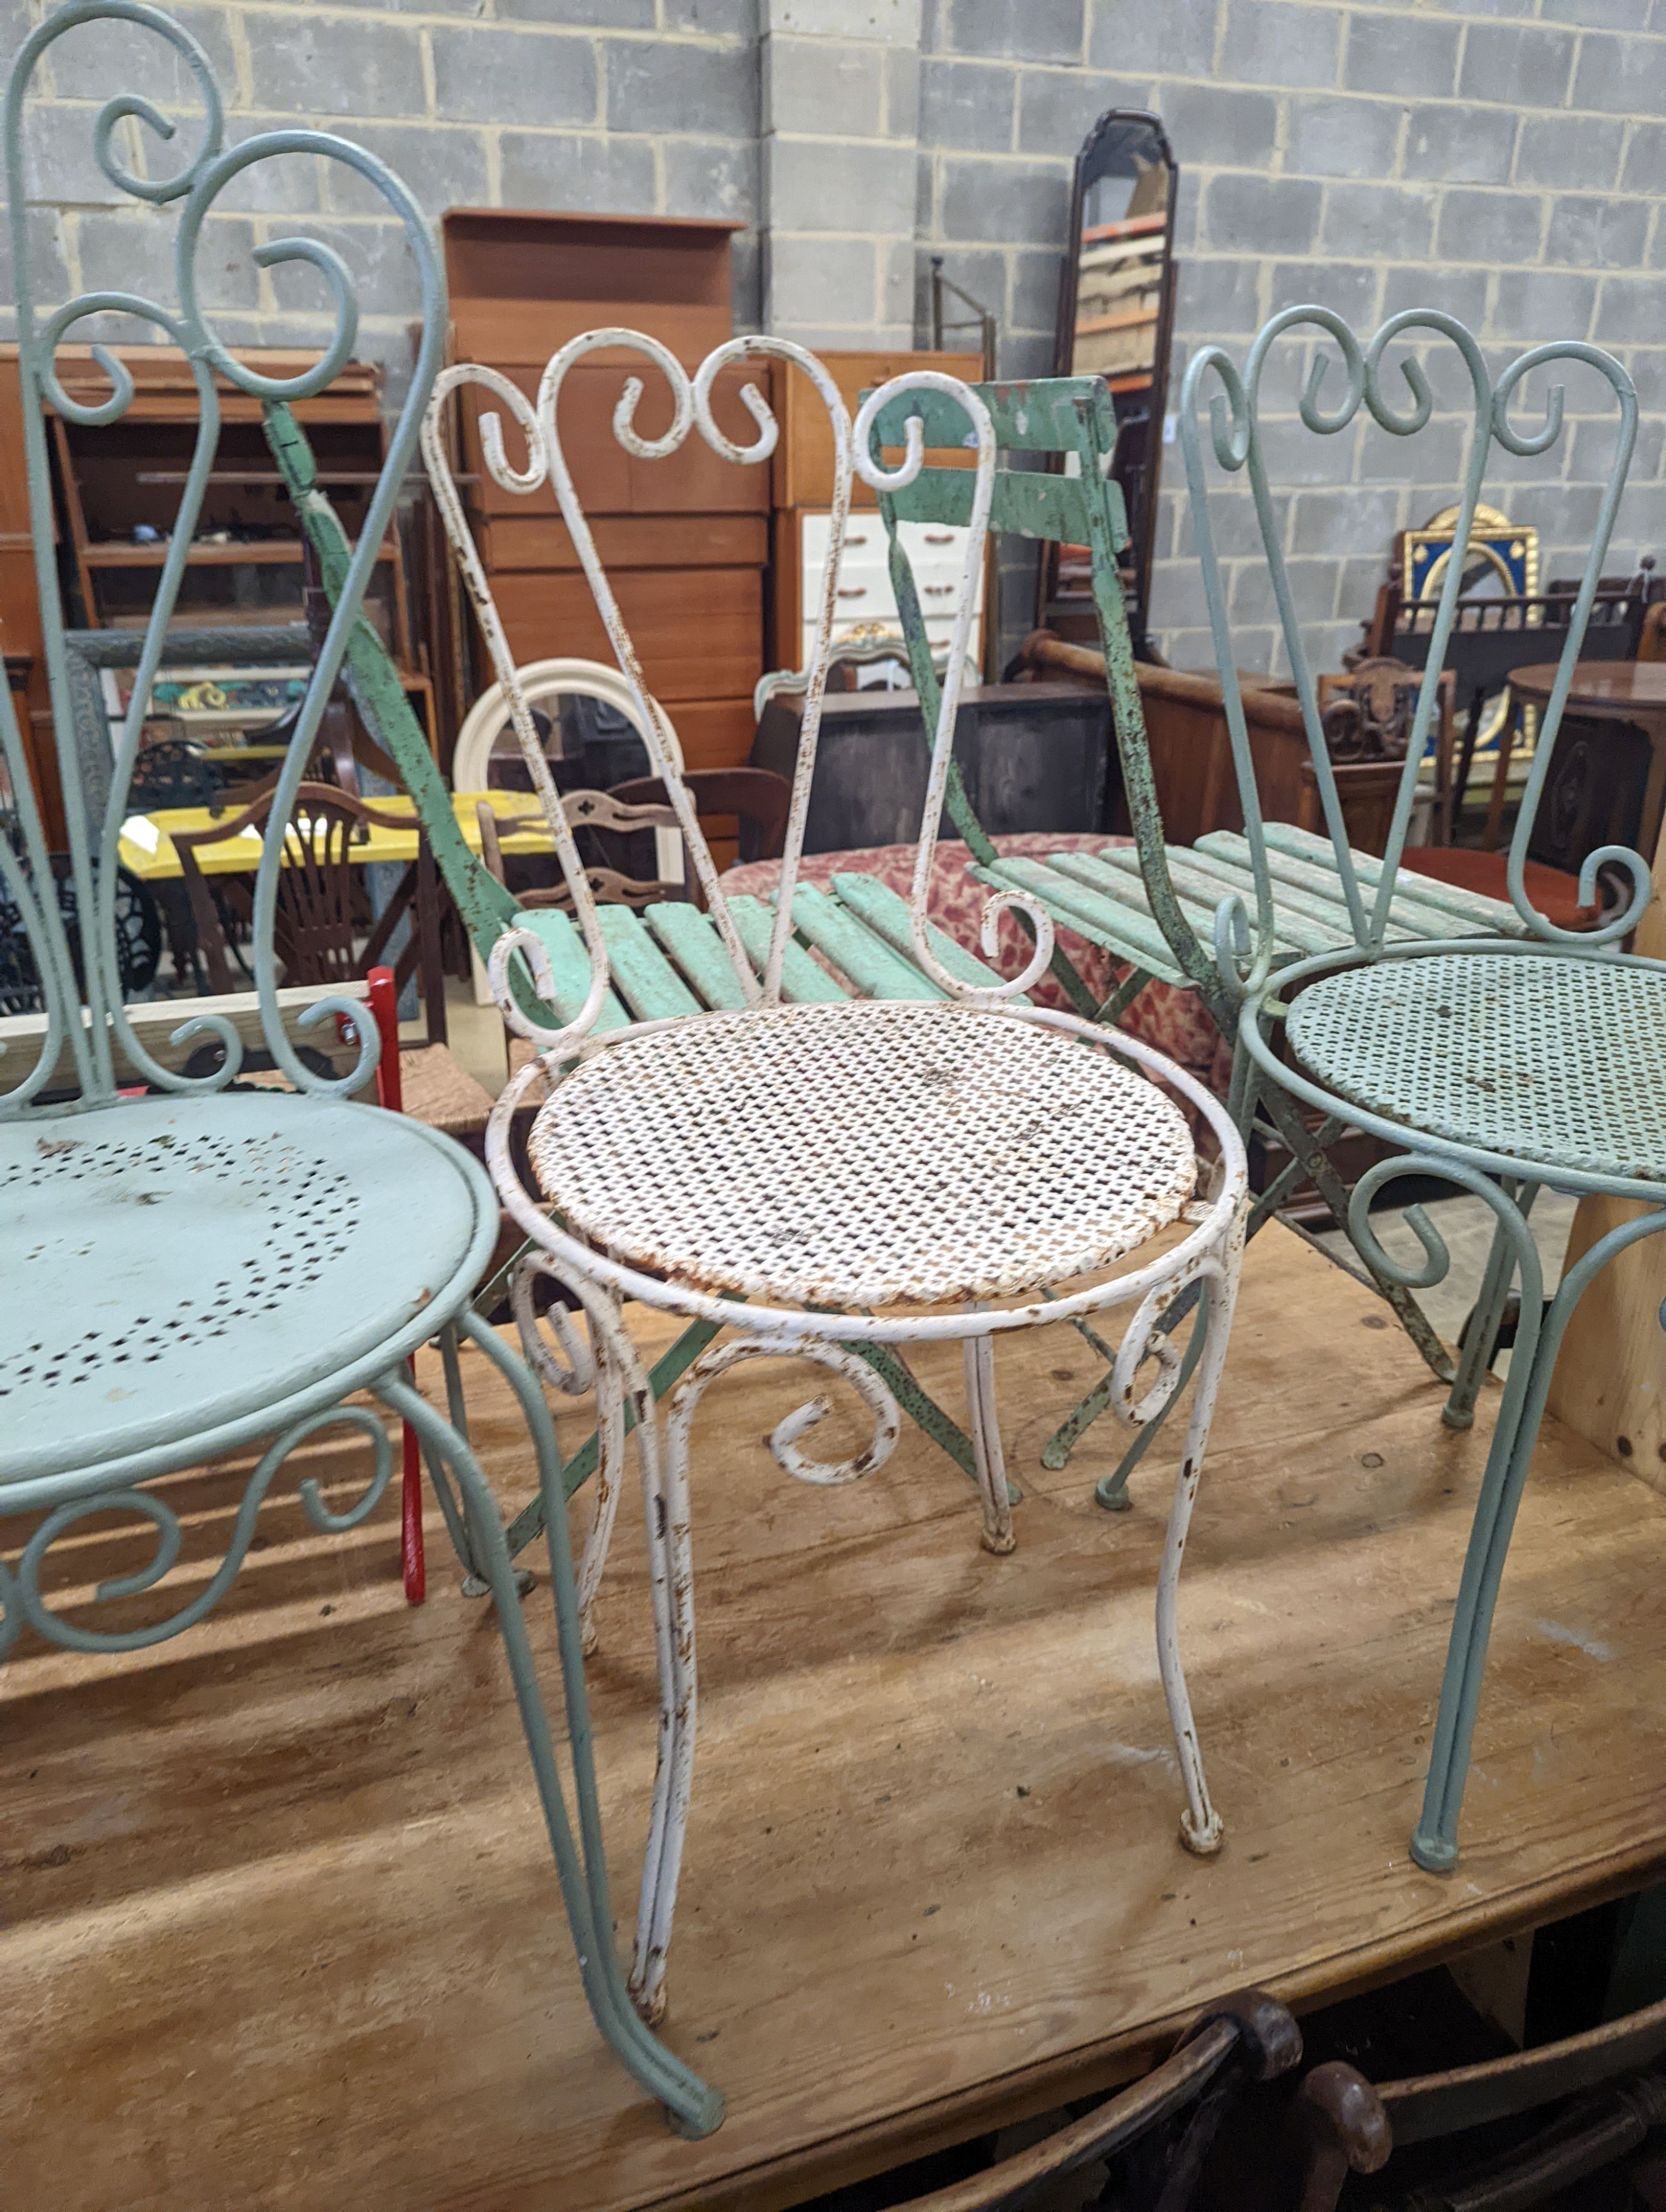 Six painted metal garden chairs